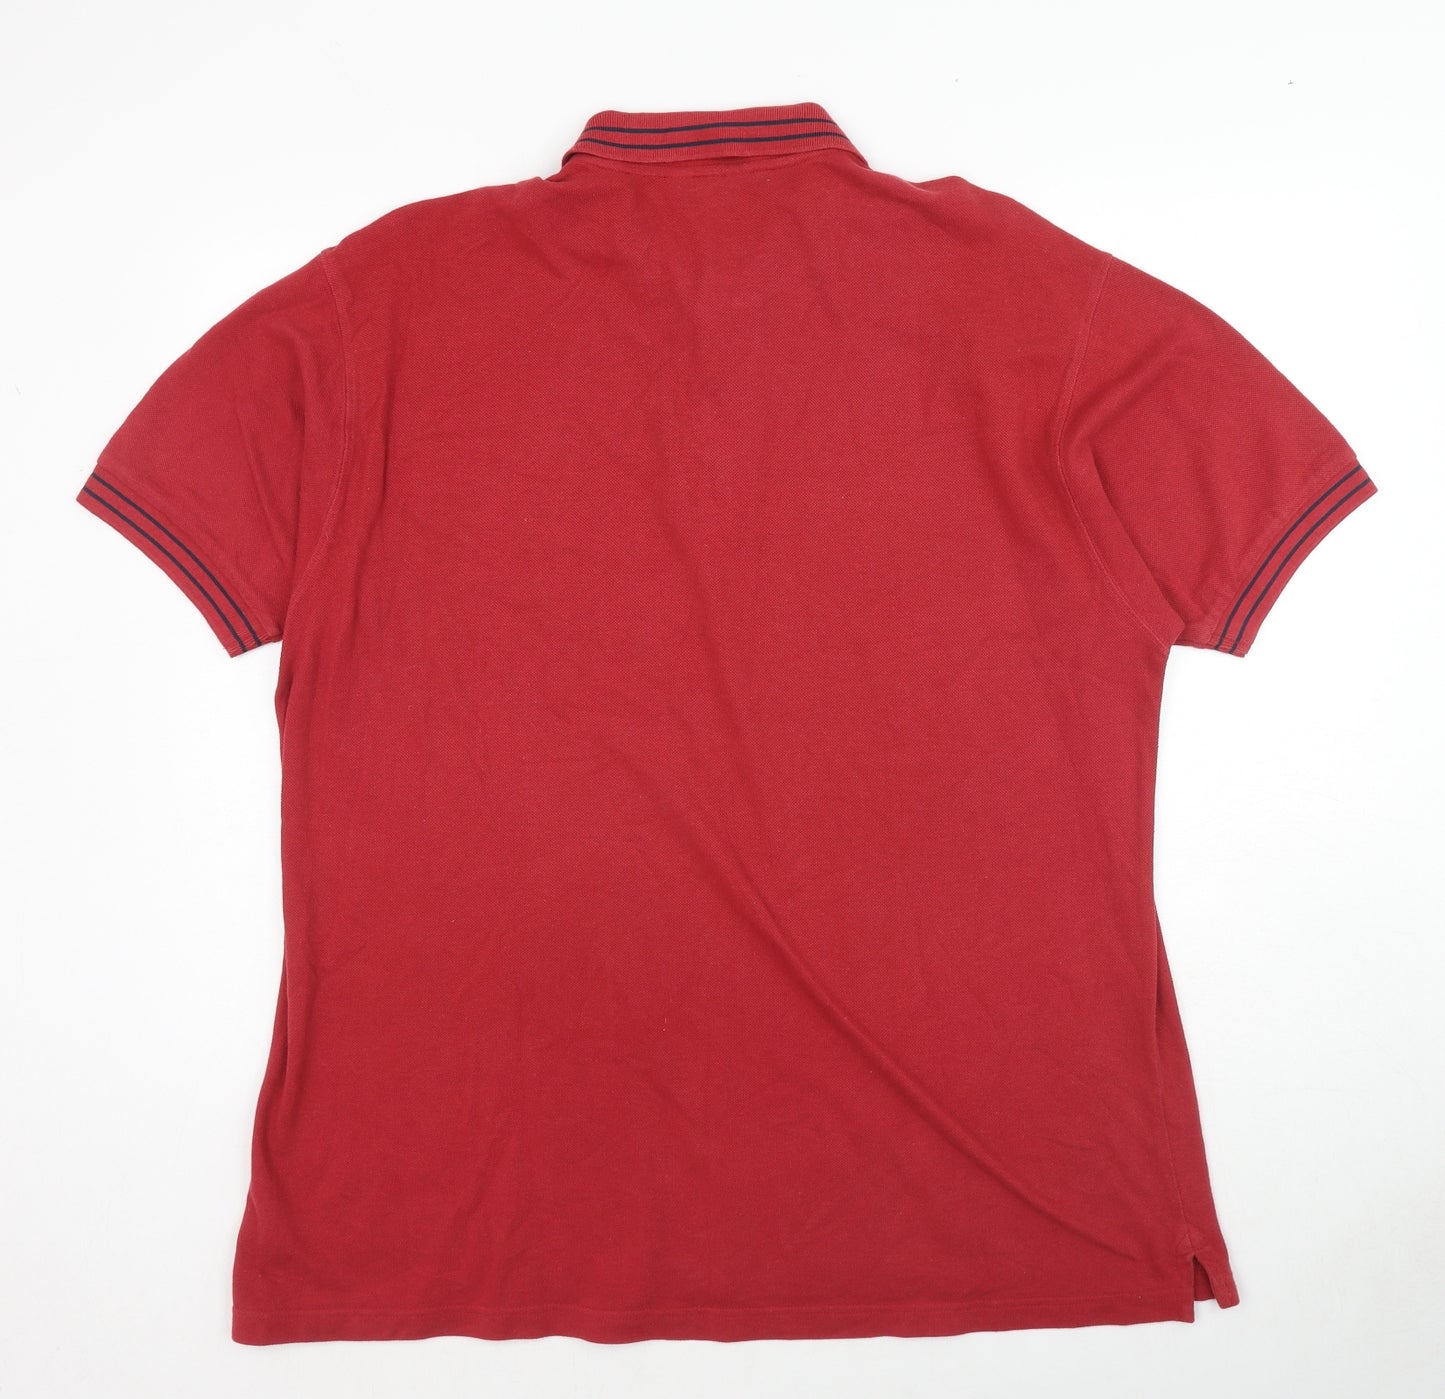 ITEMS Mens Red Cotton Polo Size XL Collared Button